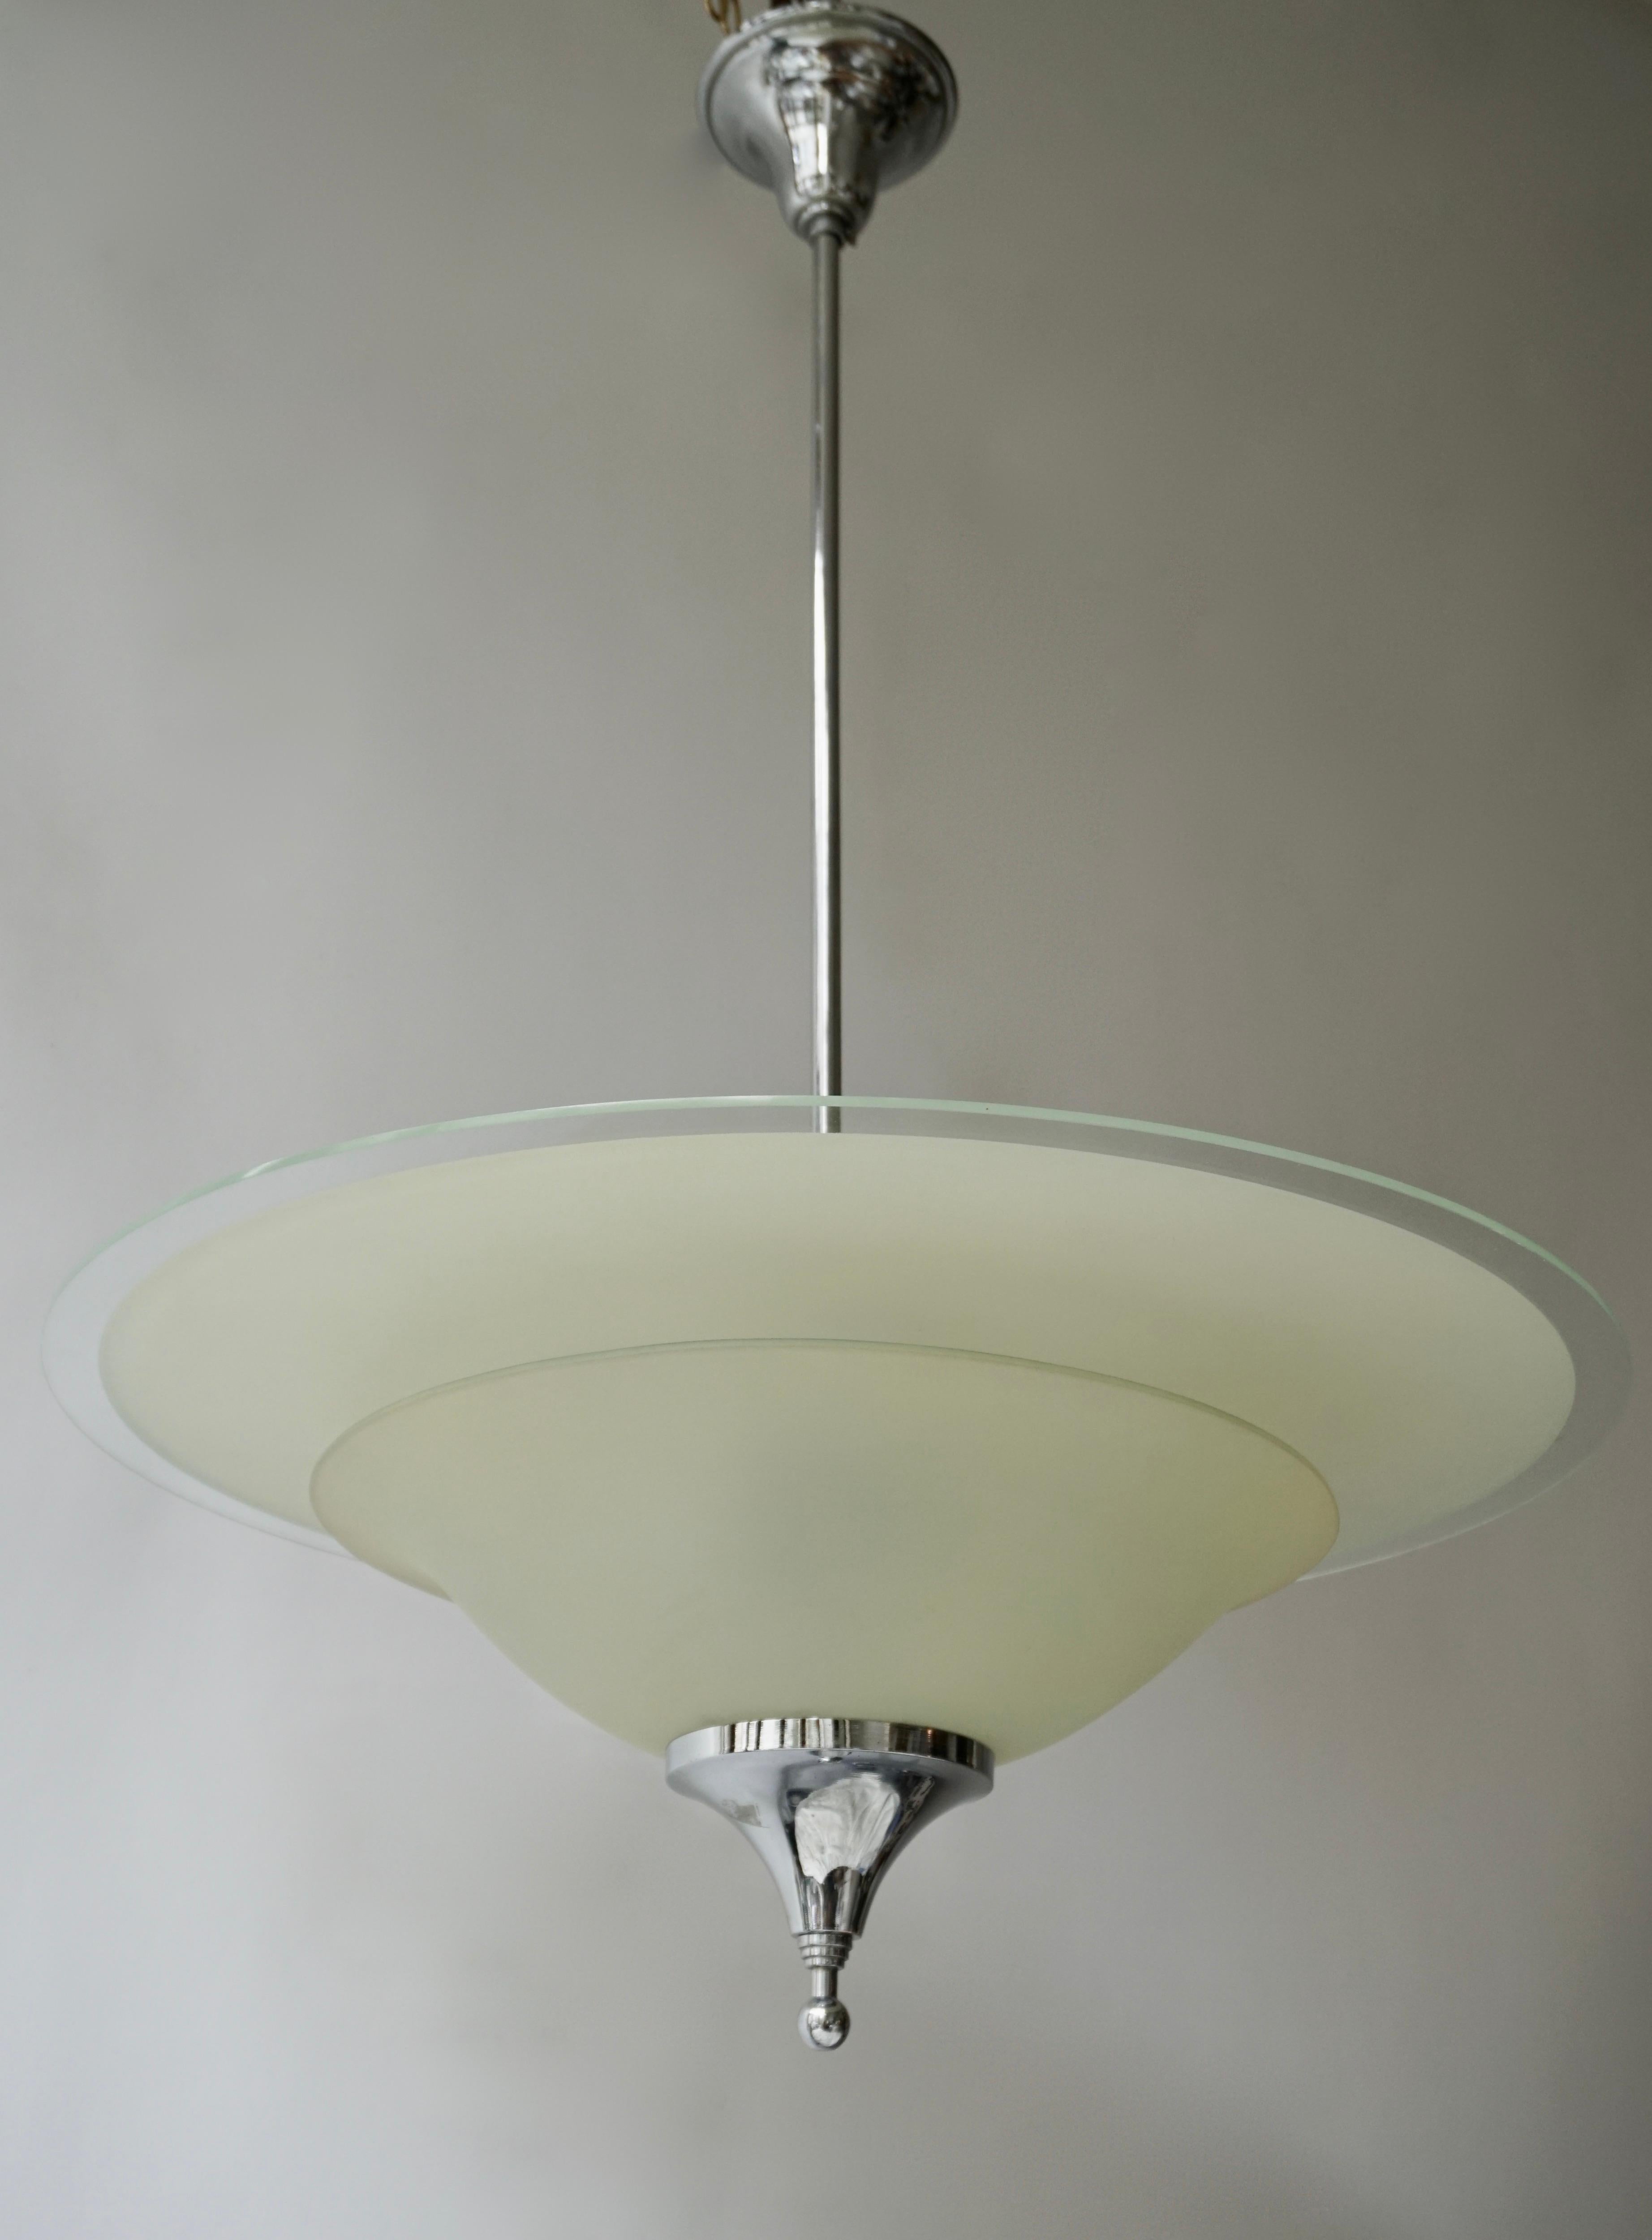 Art Deco Ceiling Light in Glass and Chrome, Belgium, 1930s For Sale 2